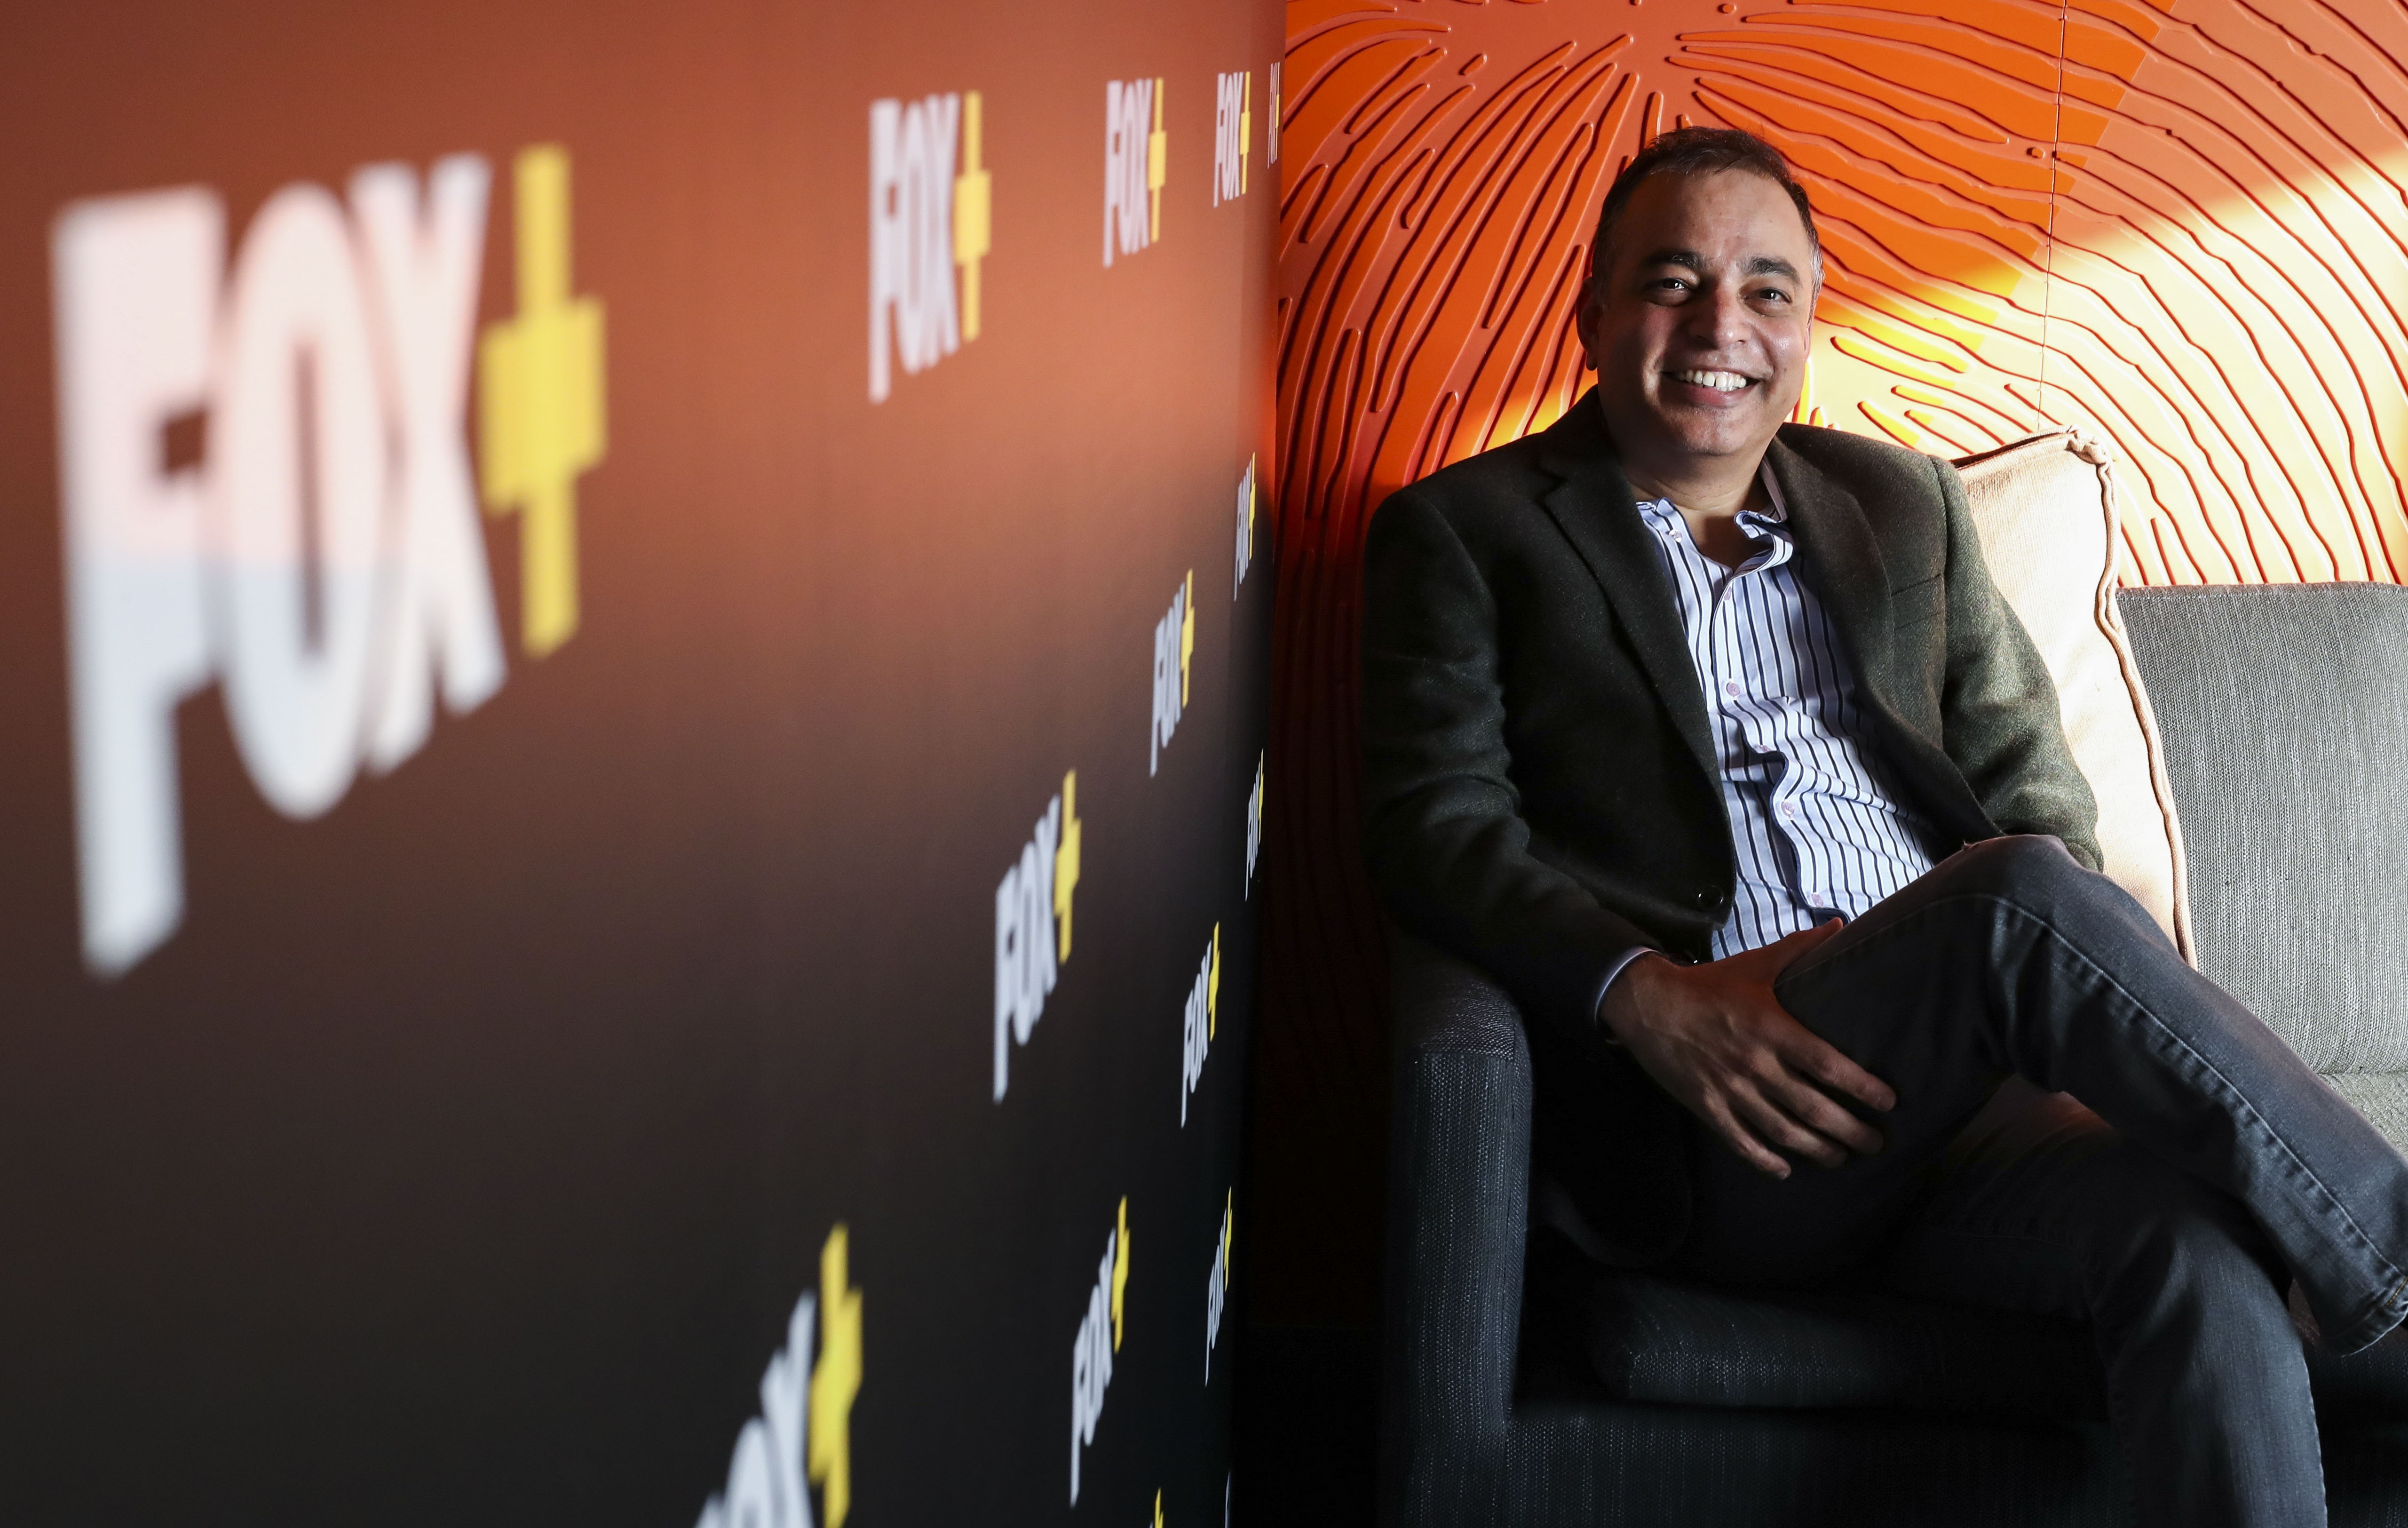 Zubin Gandevia, president of Fox Networks Group Asia, says he will provide high-quality content on the Fox+ streaming service. Photo: Nora Tam